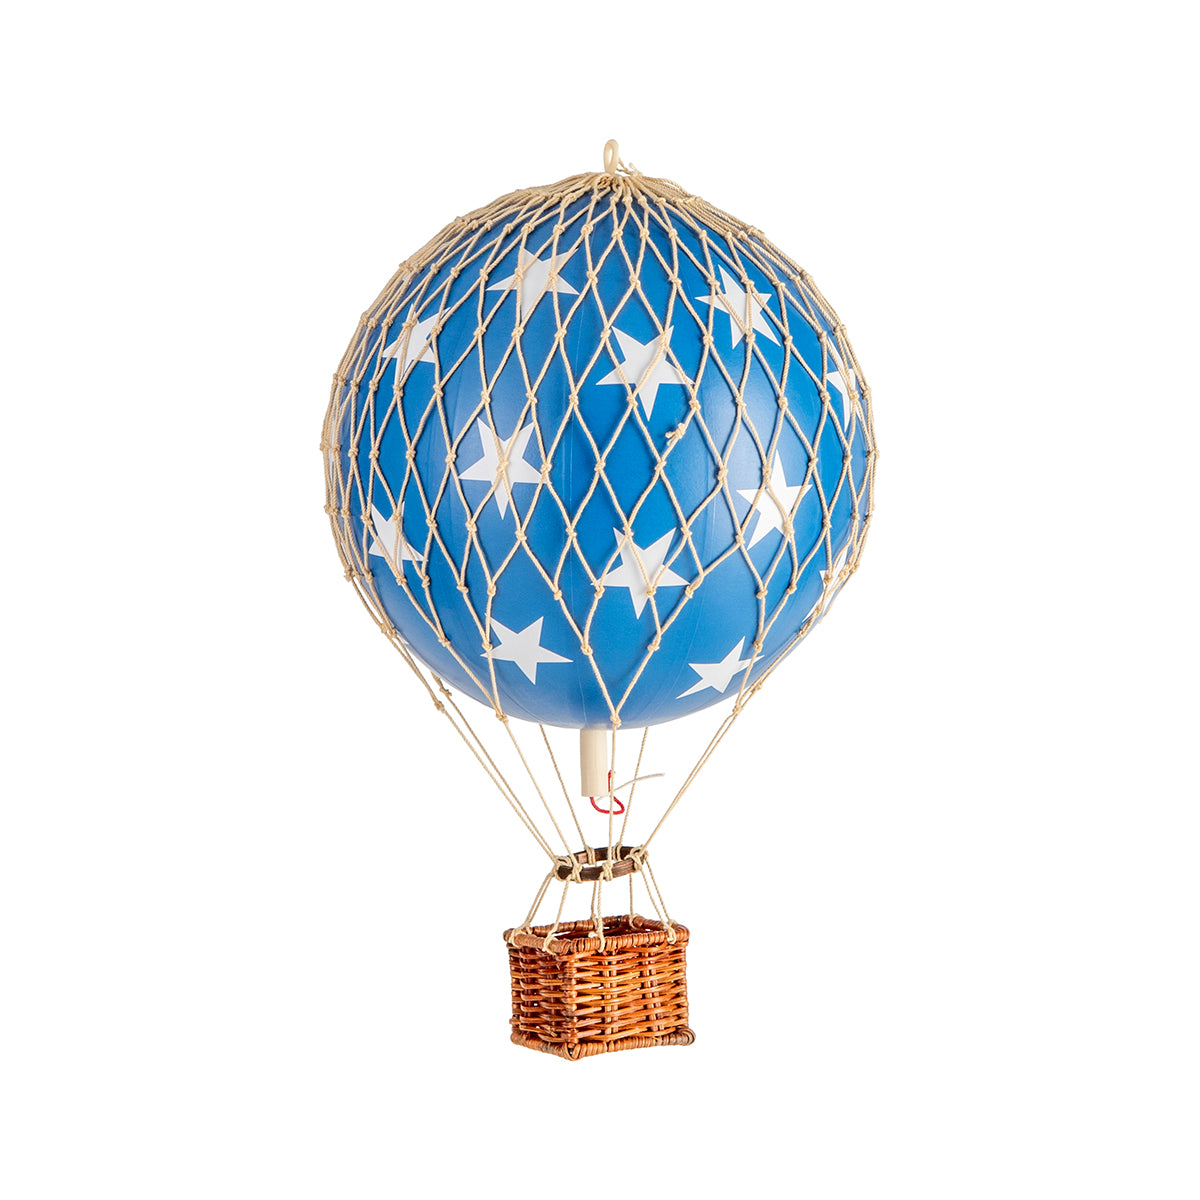 A quirky Wonderen Small Hot Air Balloon decorated with stars floats majestically in the sky.